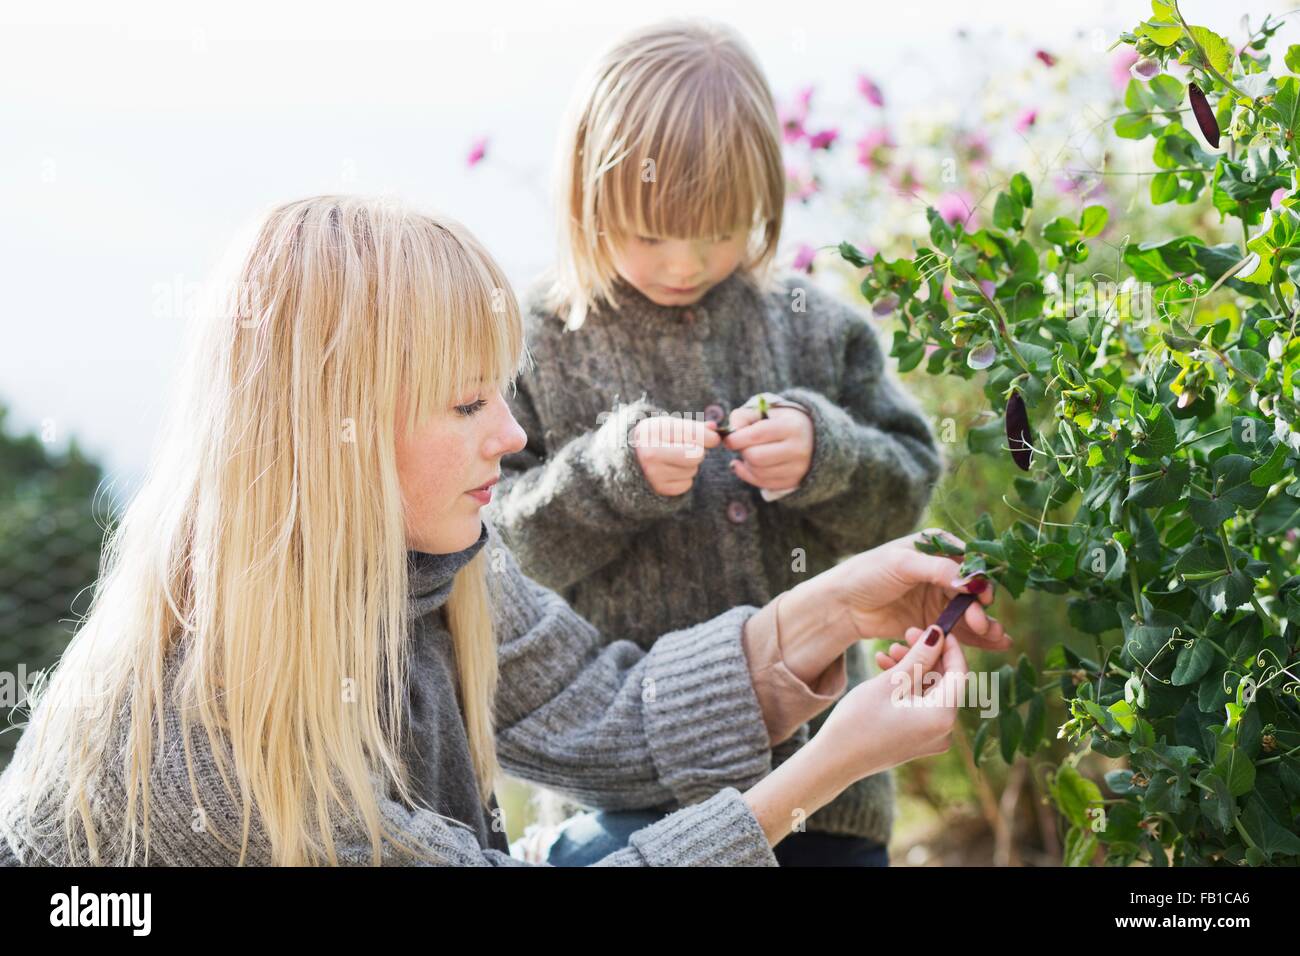 Mid adult woman and son tending bush in organic garden Stock Photo